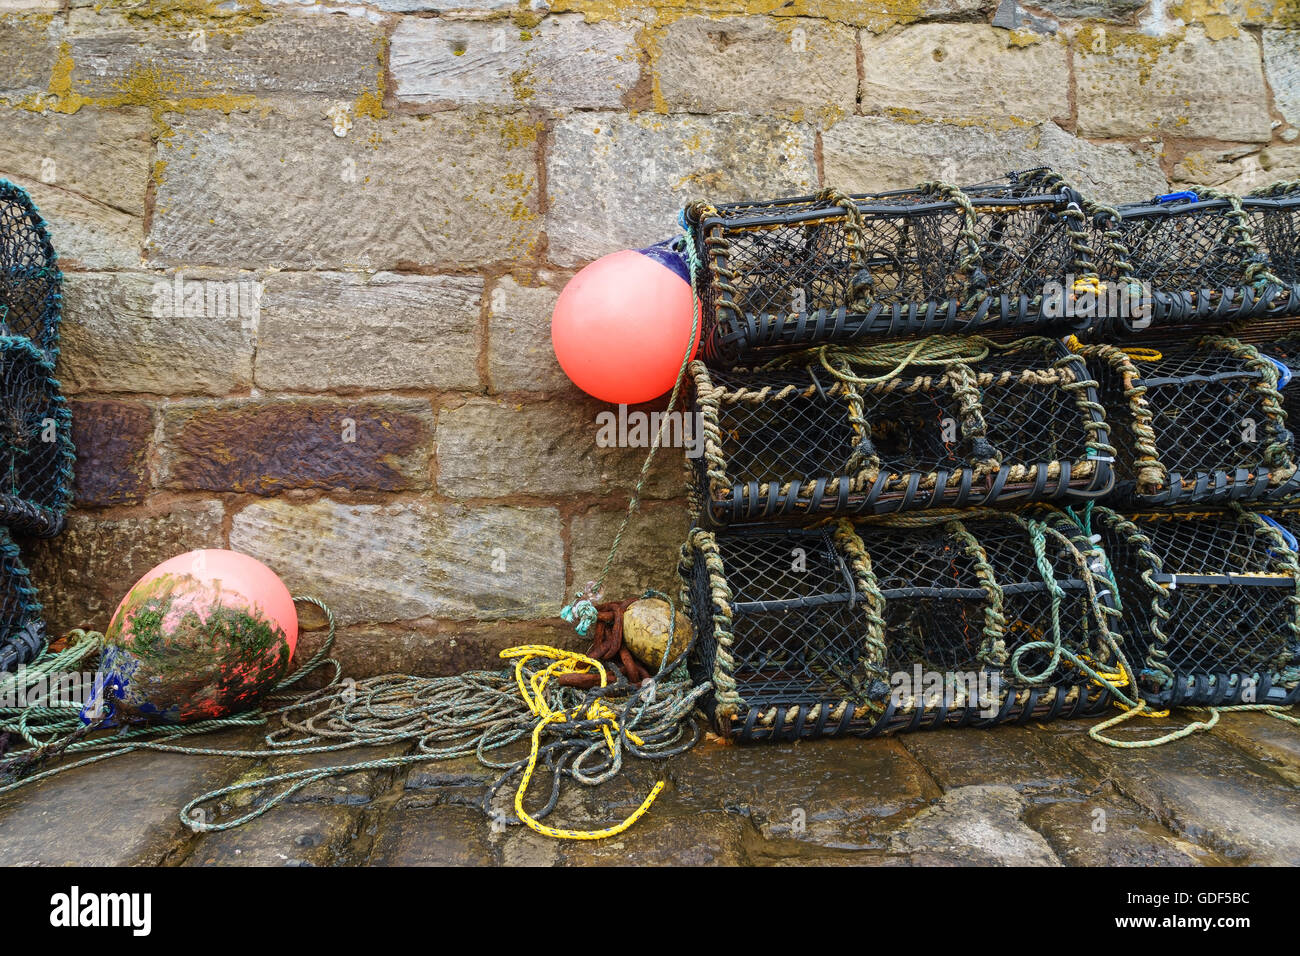 Lobster pots (creels) on an old stone harbour wall in Scotland. Stock Photo